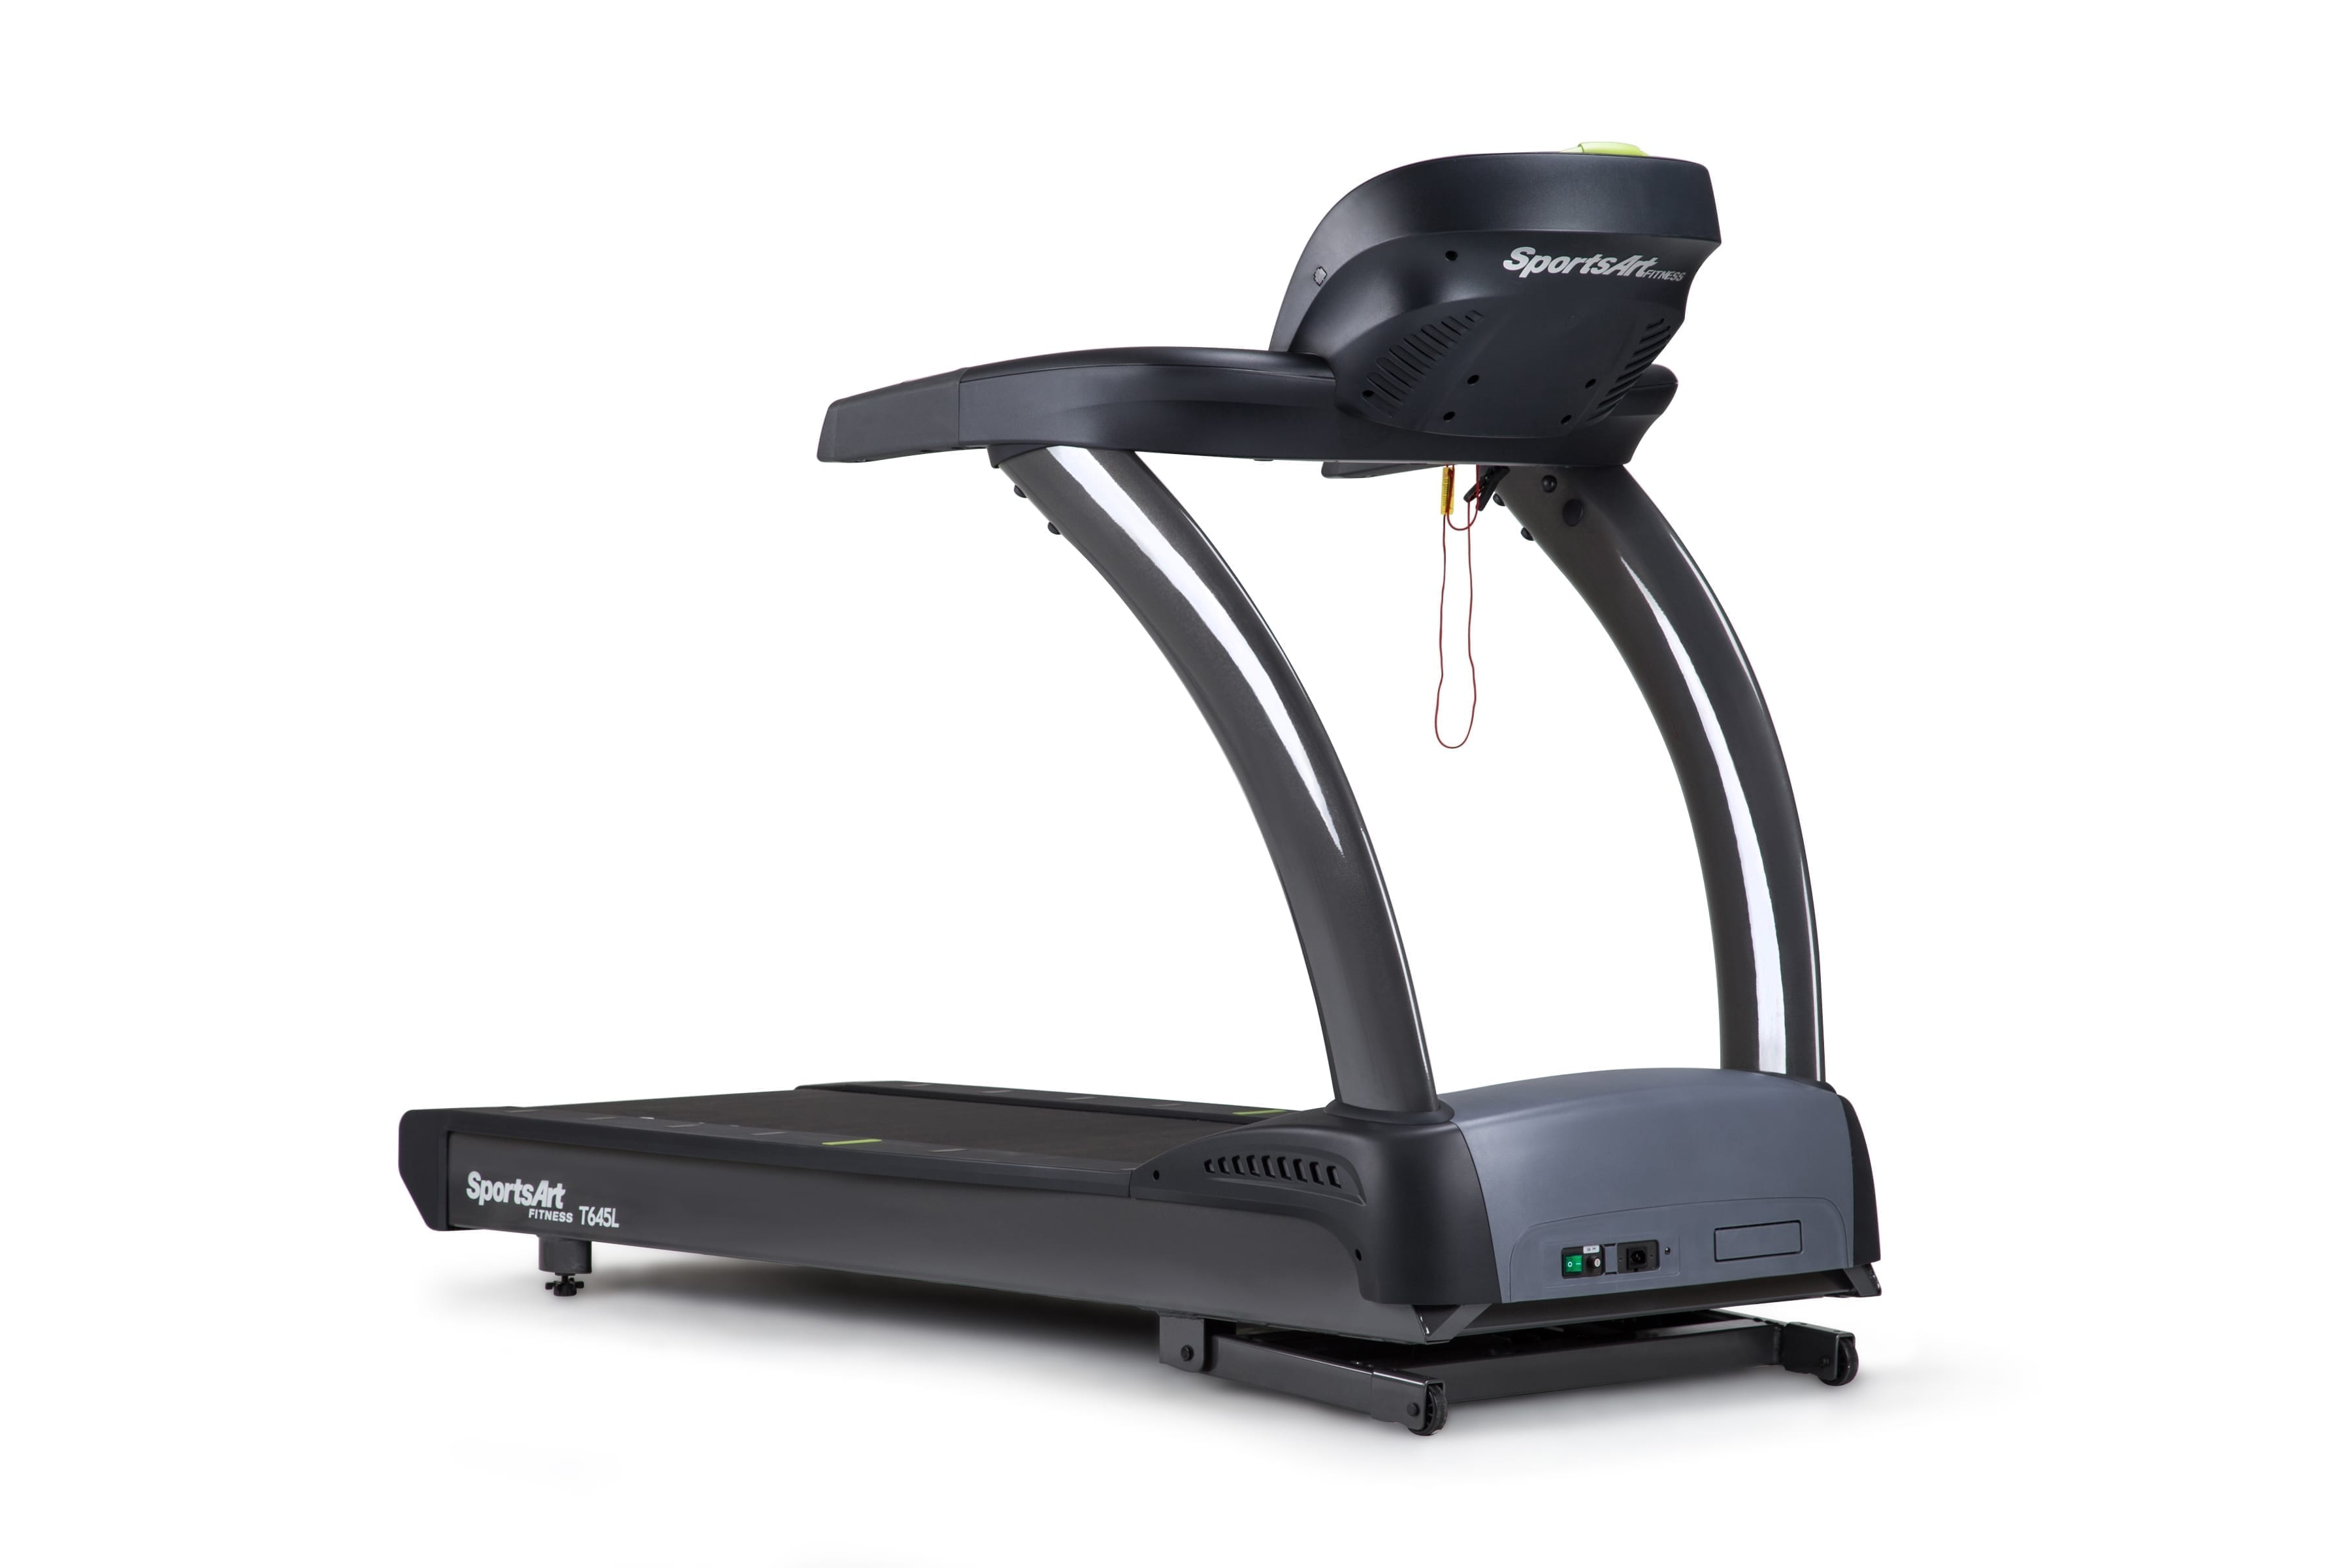 SportsArt Performance Treadmill T645L angle side view with console towad the right hand view